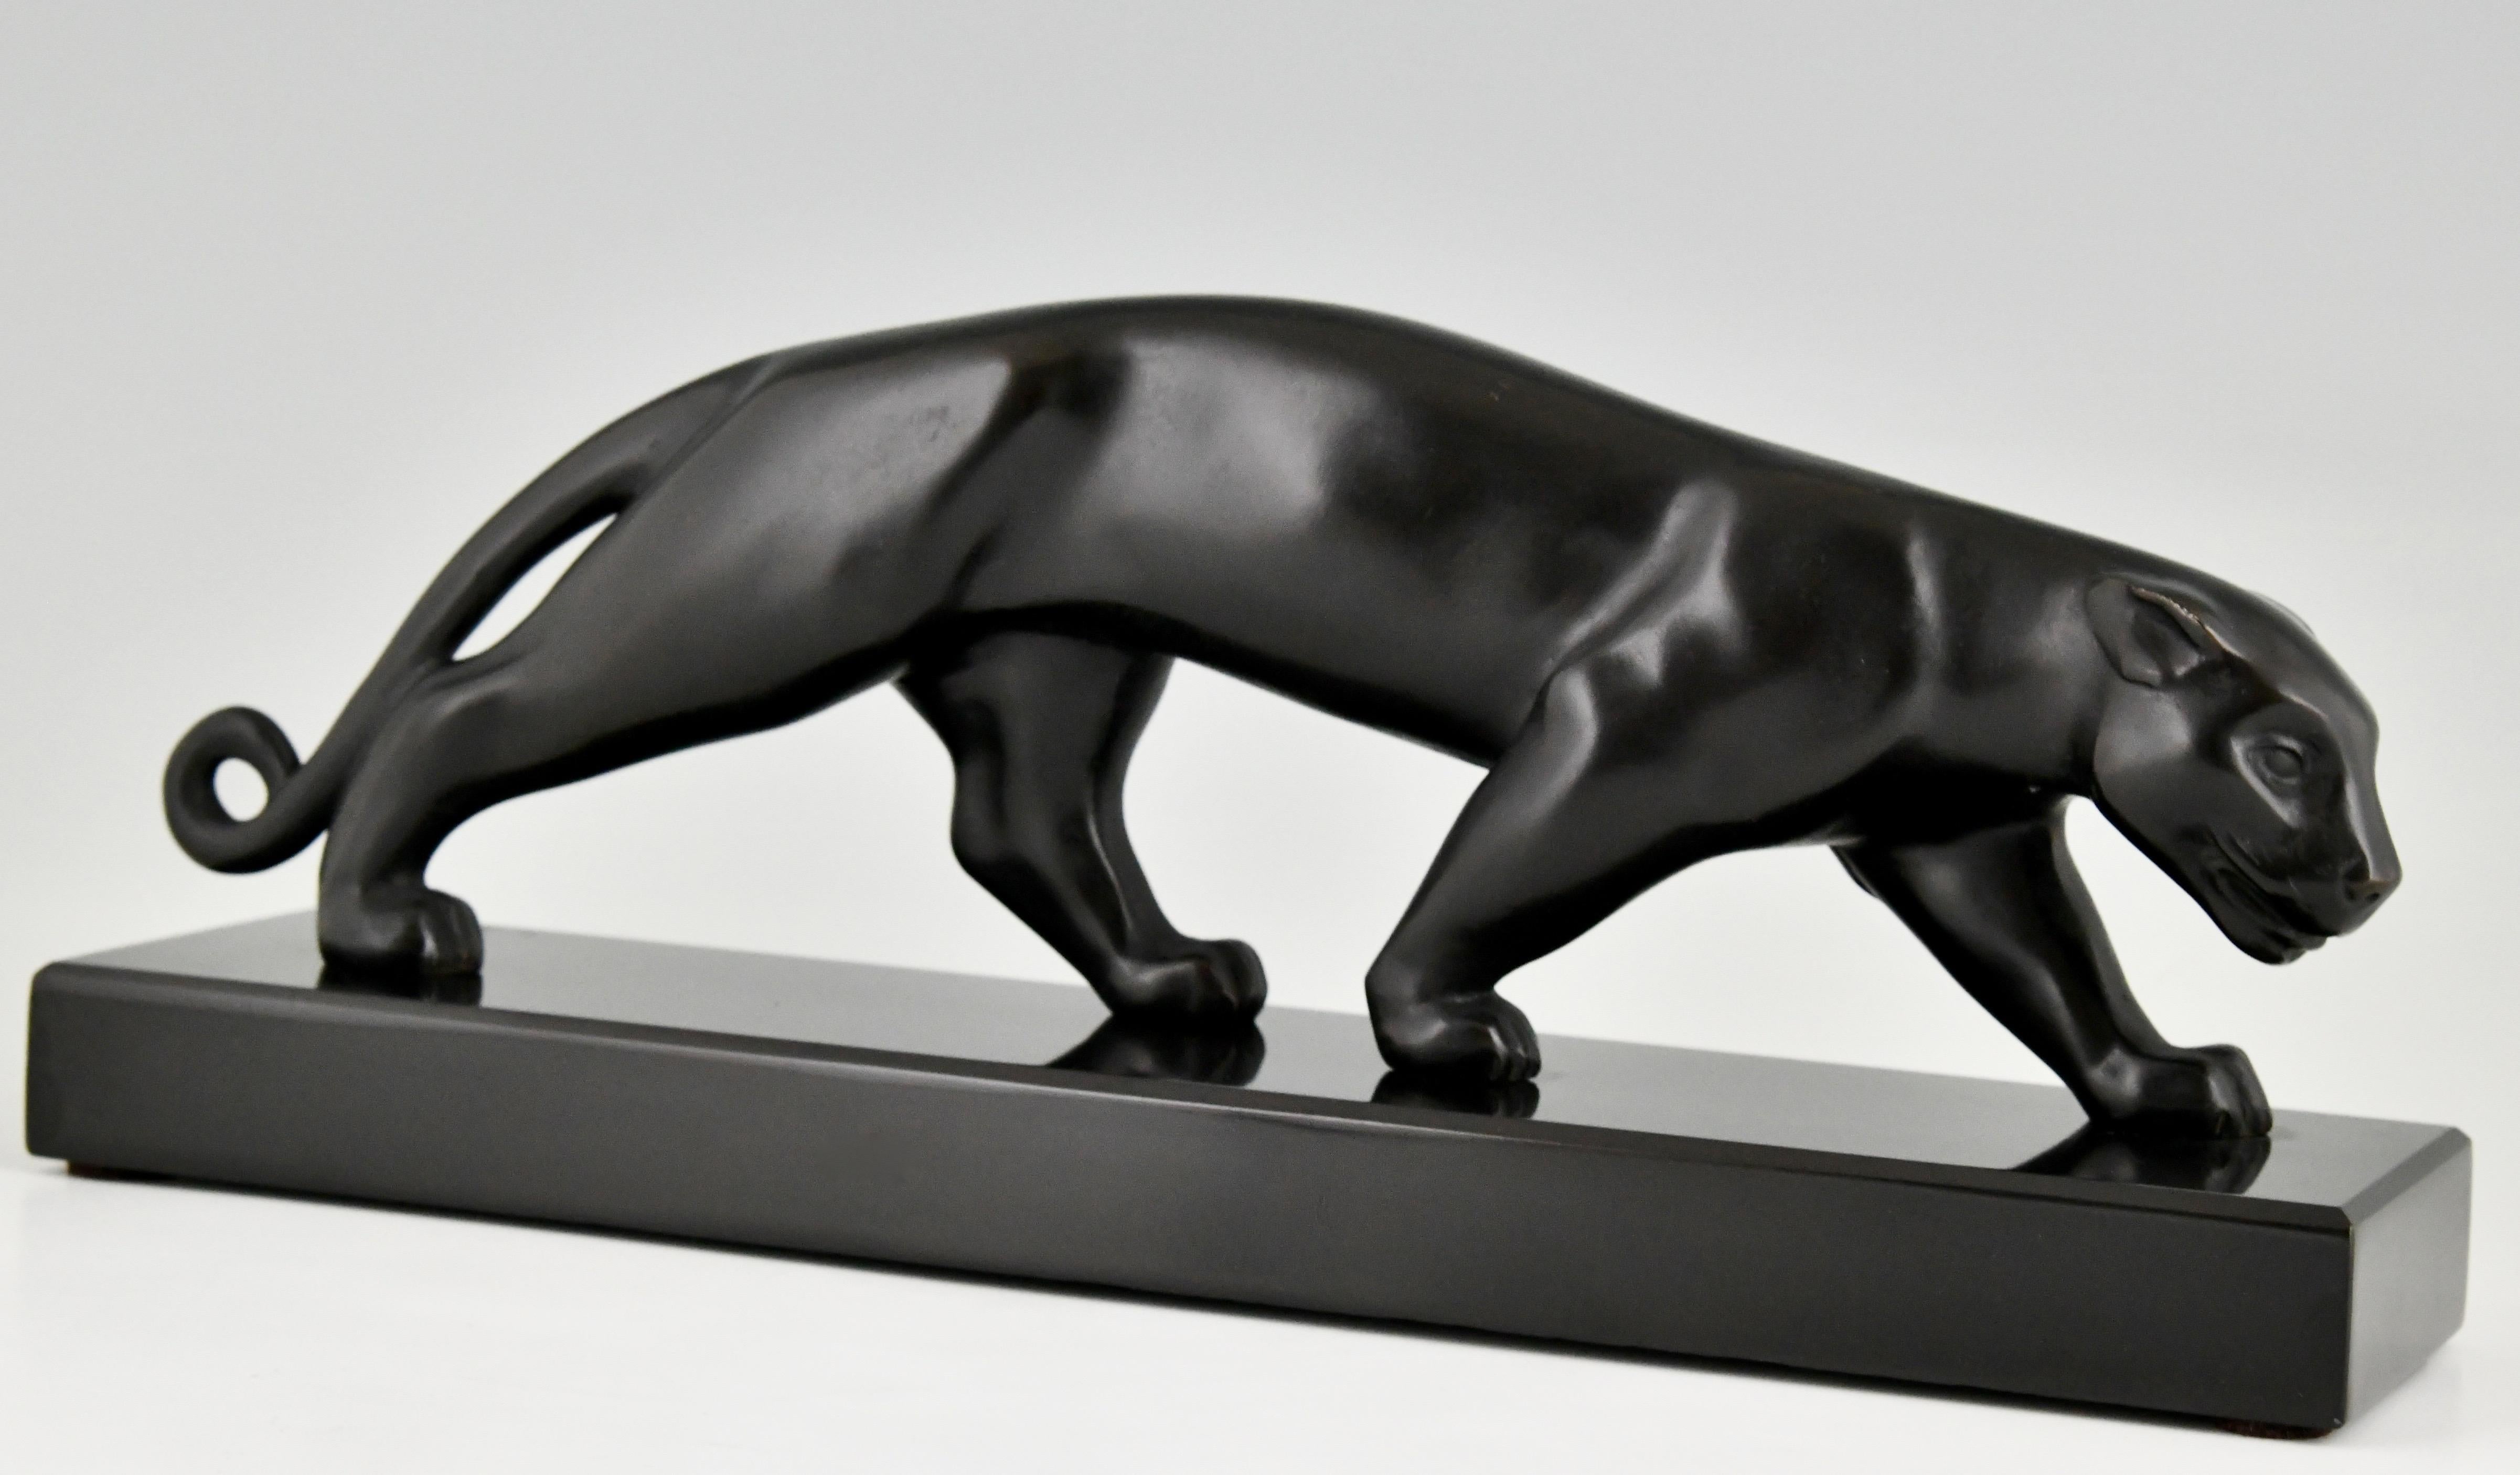 Stylish Art Deco bronze sculpture of a panther signed by the French artist Lucien Alliot, ca. 1925.
Bronze with black patina, on a Belgian Black marble base. 

“The dictionary of sculptors in bronze” by James Mackay. ?Antique collectors